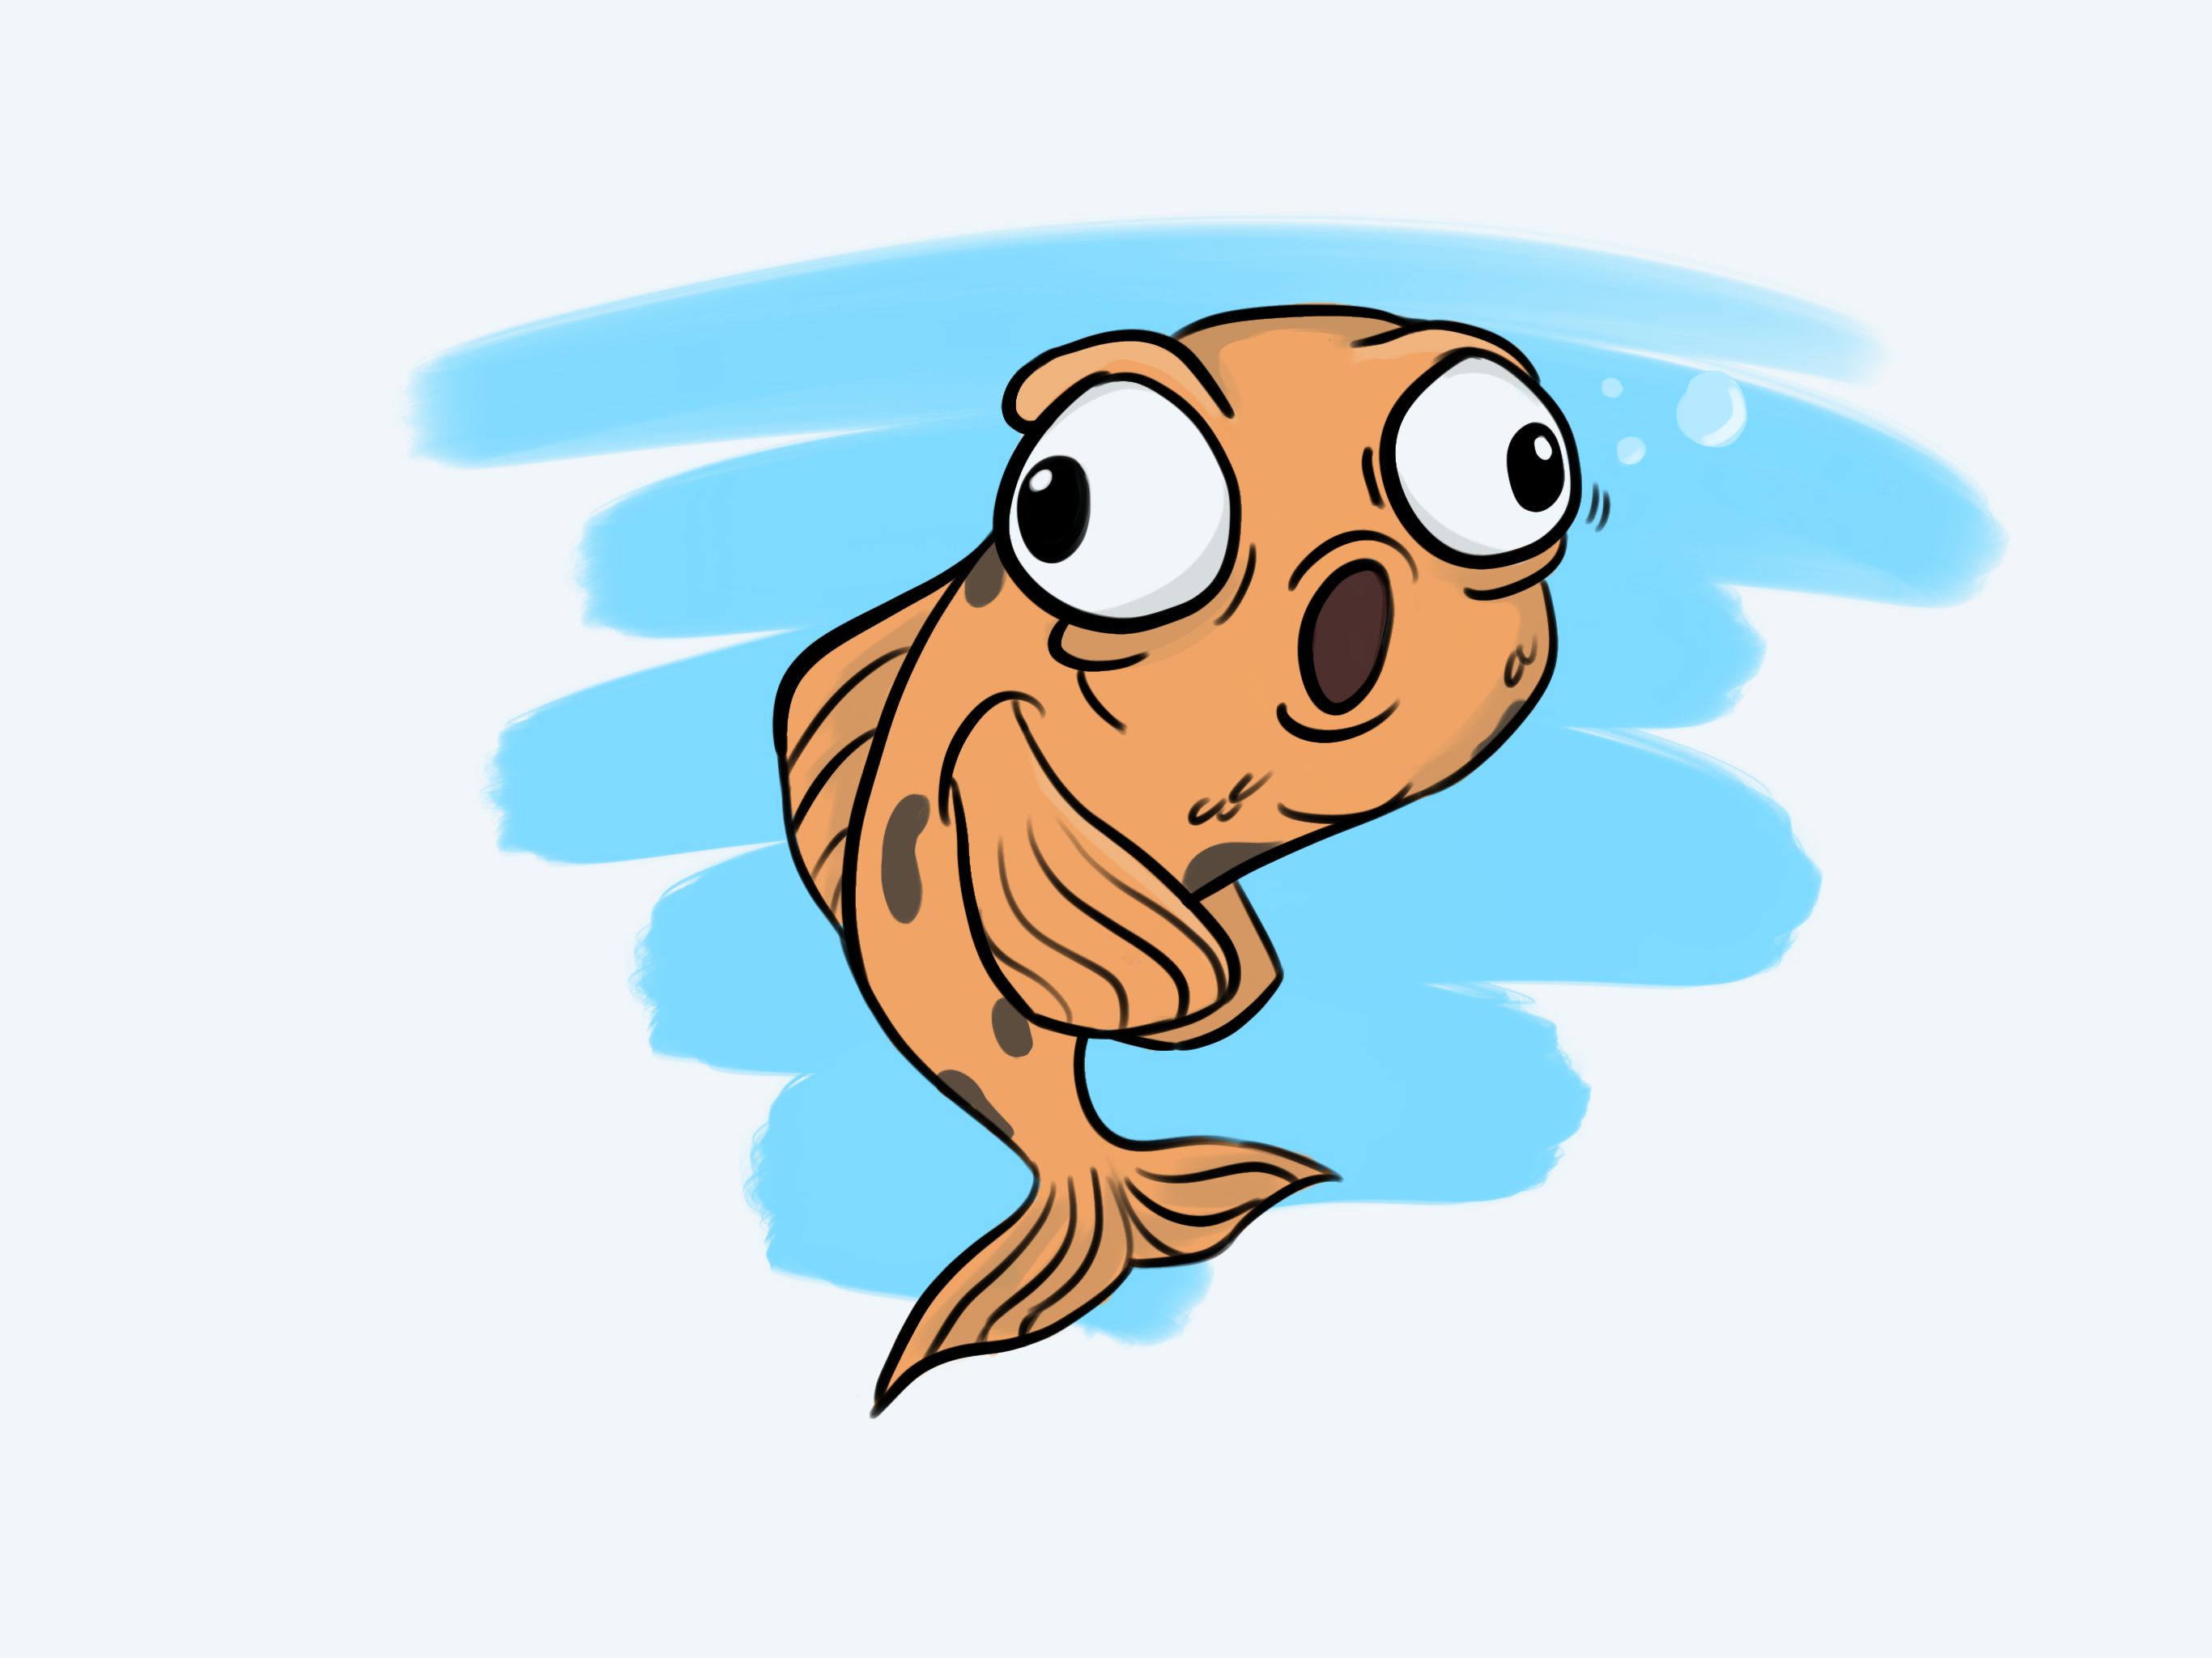 2019 - Barry the Boggle-Eyed Fish